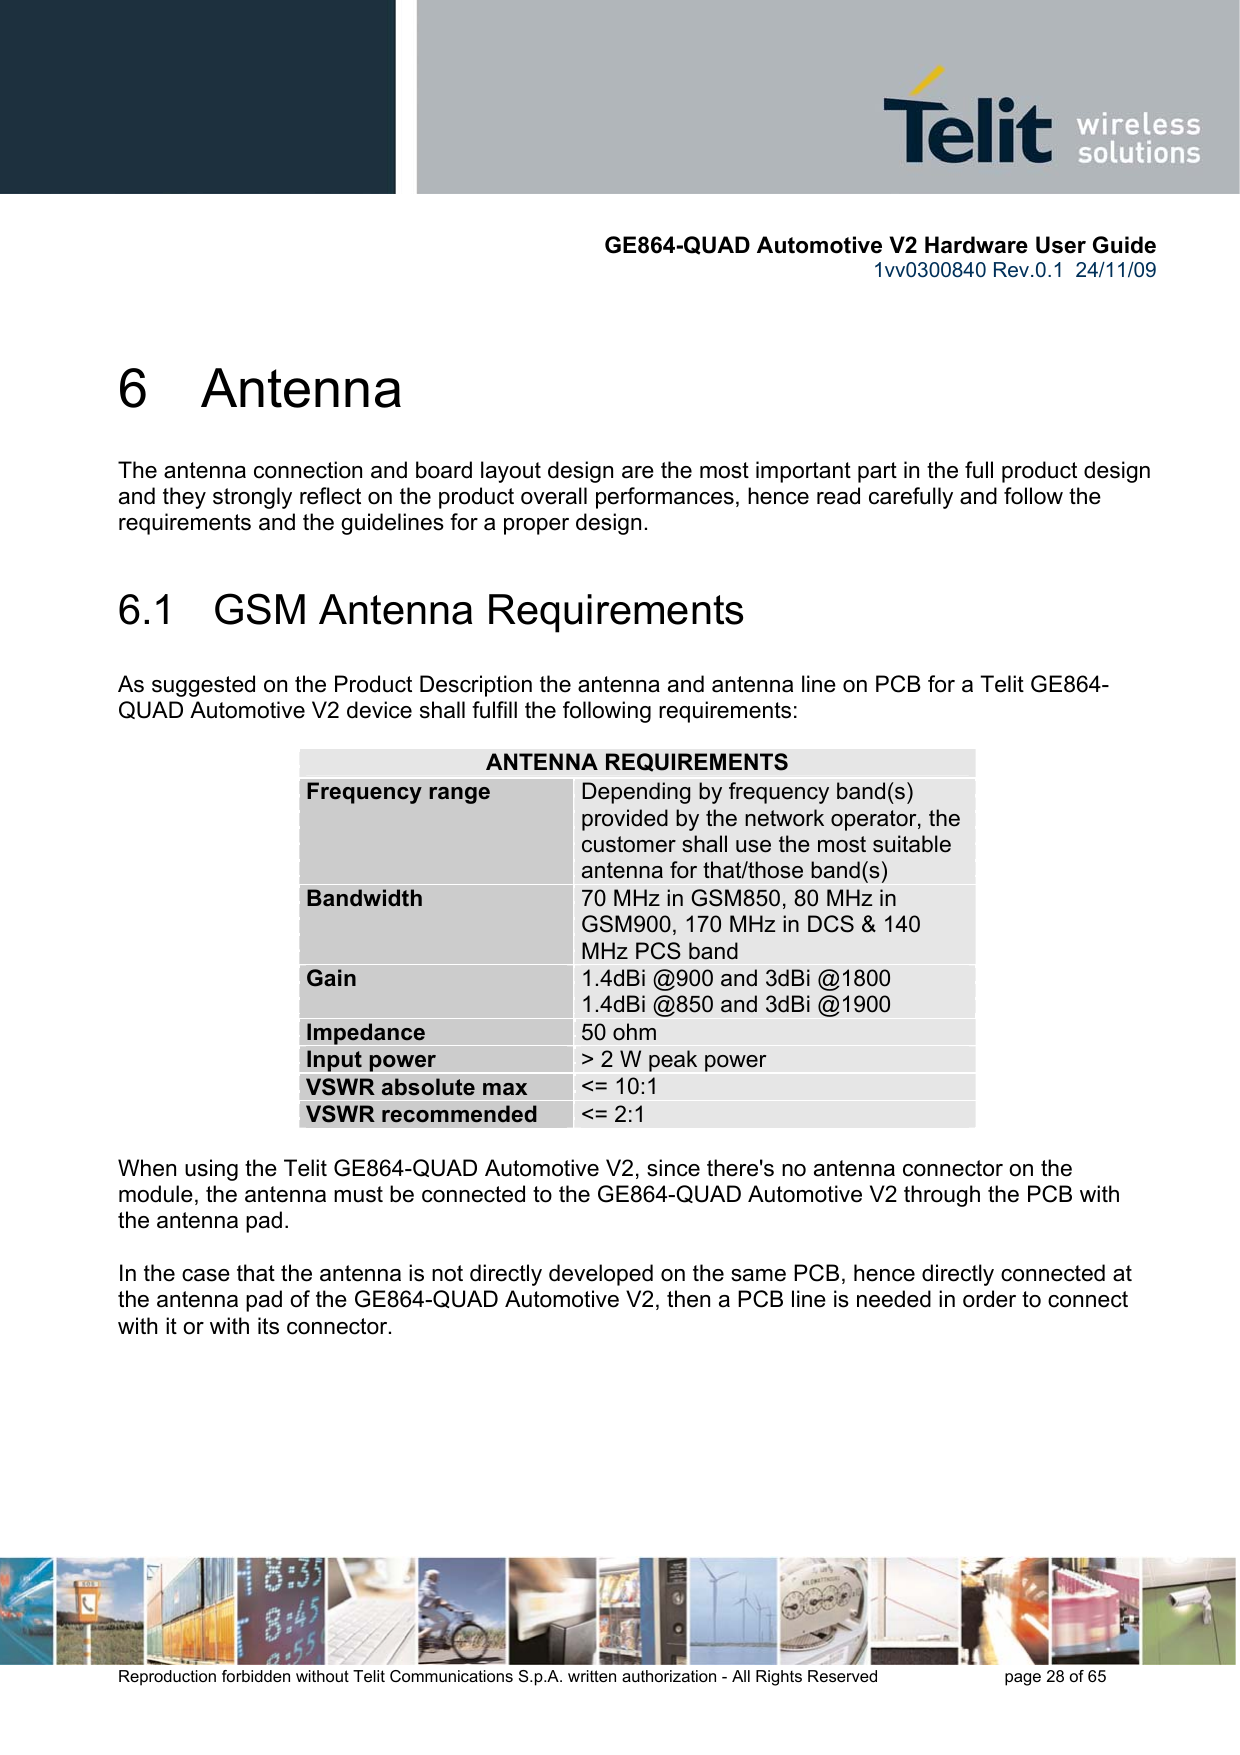       GE864-QUAD Automotive V2 Hardware User Guide 1vv0300840 Rev.0.1  24/11/09      Reproduction forbidden without Telit Communications S.p.A. written authorization - All Rights Reserved    page 28 of 65  6  Antenna The antenna connection and board layout design are the most important part in the full product design and they strongly reflect on the product overall performances, hence read carefully and follow the requirements and the guidelines for a proper design. 6.1   GSM Antenna Requirements As suggested on the Product Description the antenna and antenna line on PCB for a Telit GE864-QUAD Automotive V2 device shall fulfill the following requirements:   ANTENNA REQUIREMENTS Frequency range  Depending by frequency band(s) provided by the network operator, the customer shall use the most suitable antenna for that/those band(s) Bandwidth  70 MHz in GSM850, 80 MHz in GSM900, 170 MHz in DCS &amp; 140 MHz PCS band Gain  1.4dBi @900 and 3dBi @1800 1.4dBi @850 and 3dBi @1900 Impedance  50 ohm Input power  &gt; 2 W peak power VSWR absolute max  &lt;= 10:1 VSWR recommended  &lt;= 2:1  When using the Telit GE864-QUAD Automotive V2, since there&apos;s no antenna connector on the module, the antenna must be connected to the GE864-QUAD Automotive V2 through the PCB with the antenna pad.  In the case that the antenna is not directly developed on the same PCB, hence directly connected at the antenna pad of the GE864-QUAD Automotive V2, then a PCB line is needed in order to connect with it or with its connector.   